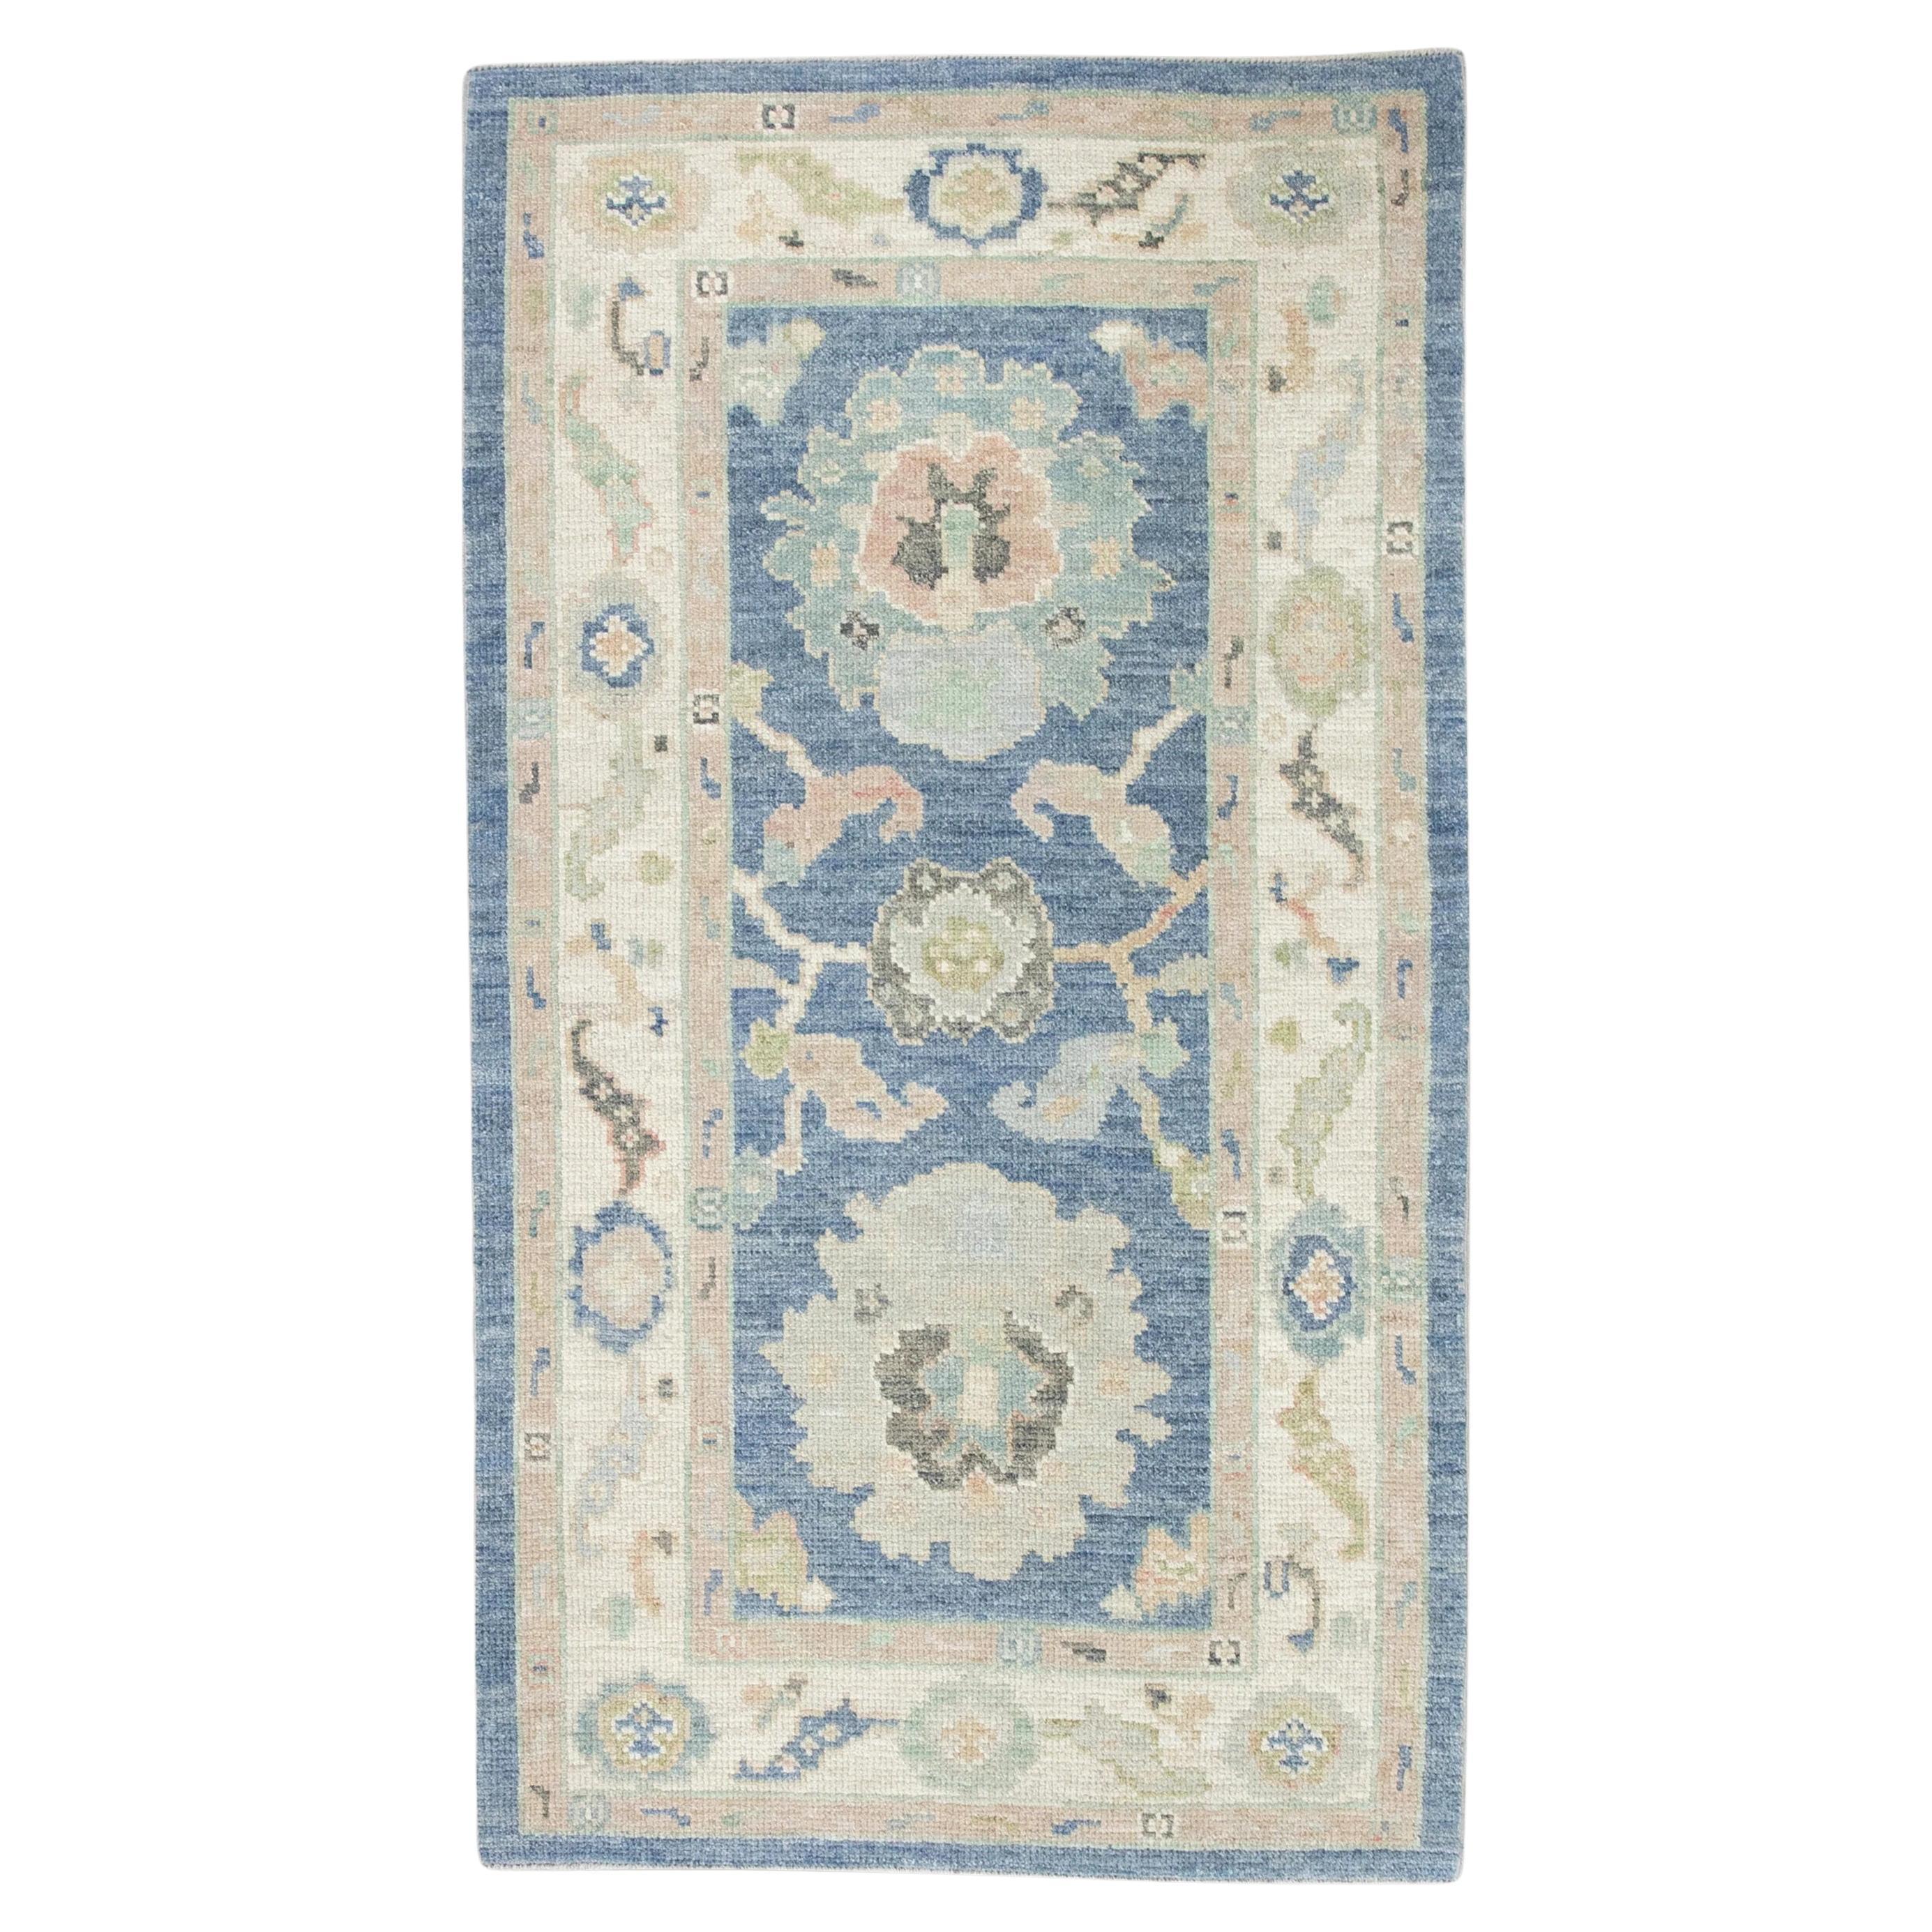 Blue and Pink Floral Handwoven Wool Turkish Oushak Rug 2'10" x 5'3"